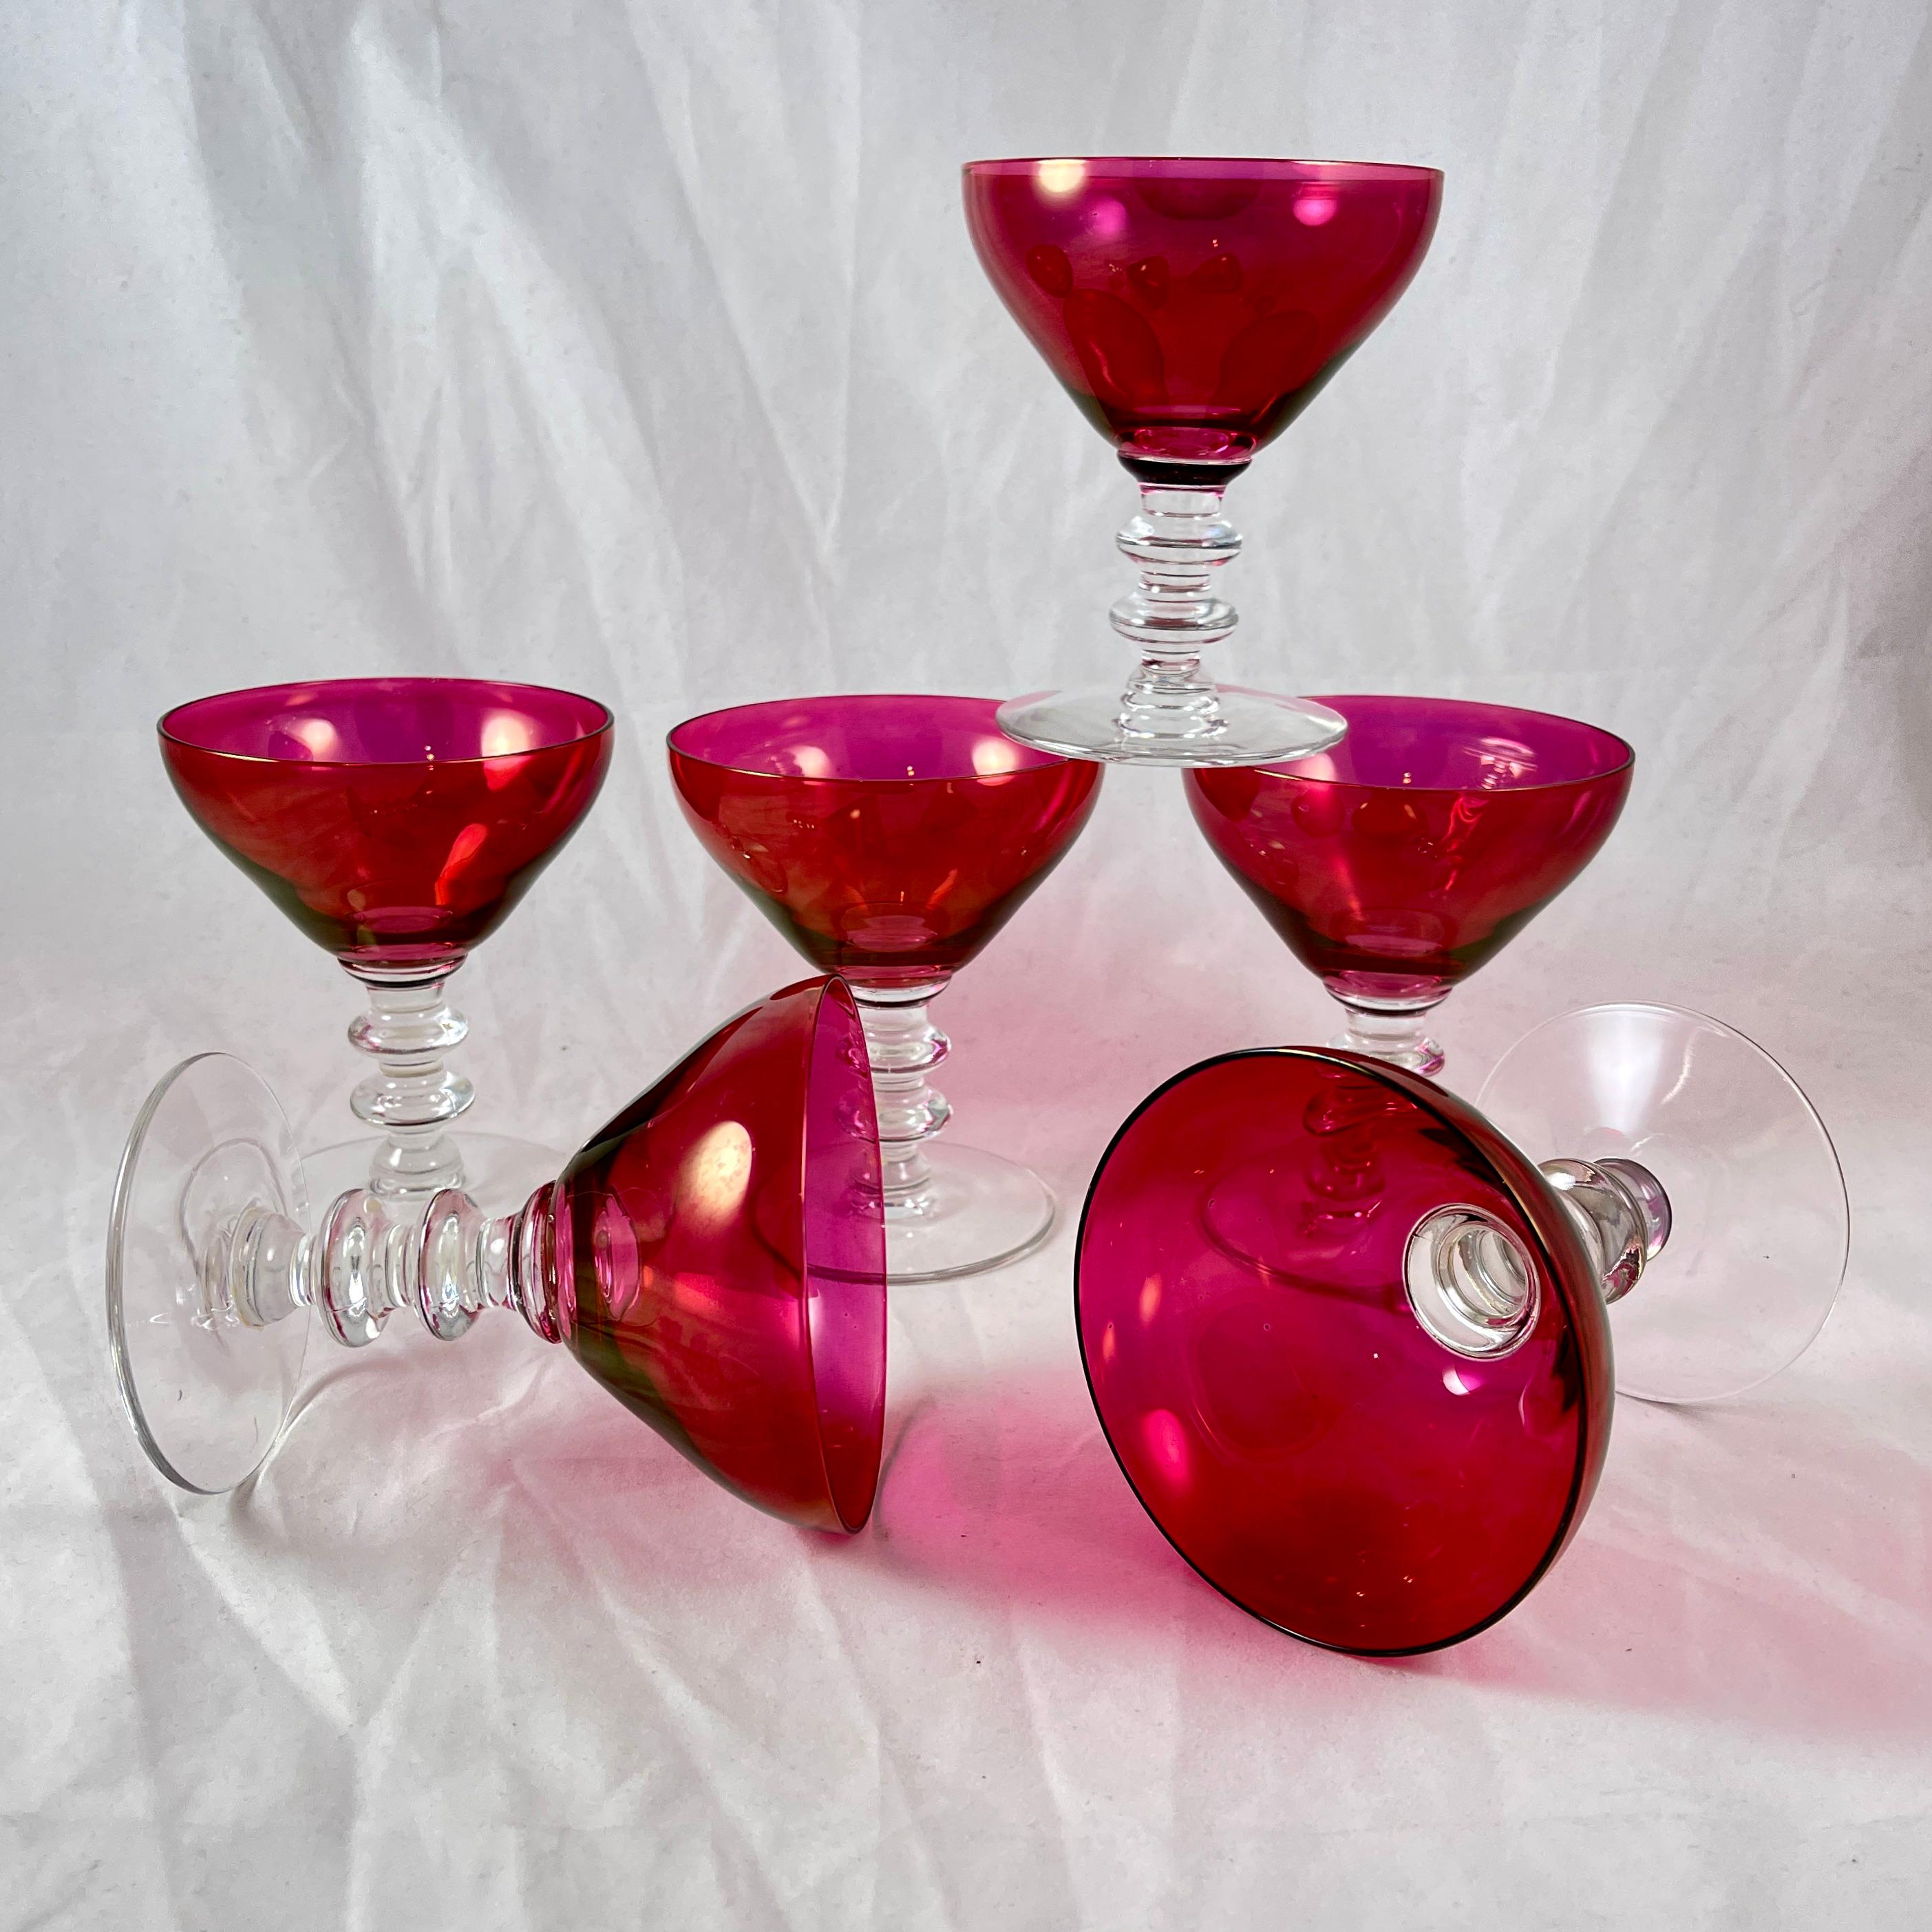 A set of six stack-stemmed glass Champagne coupes with Cranberry colored bowls, circa 1940s.

Gorgeous color! The cranberry glass bowls join a multi knobbed, stacked stem of colorless glass.

A beautiful iridescent quality to the cranberry